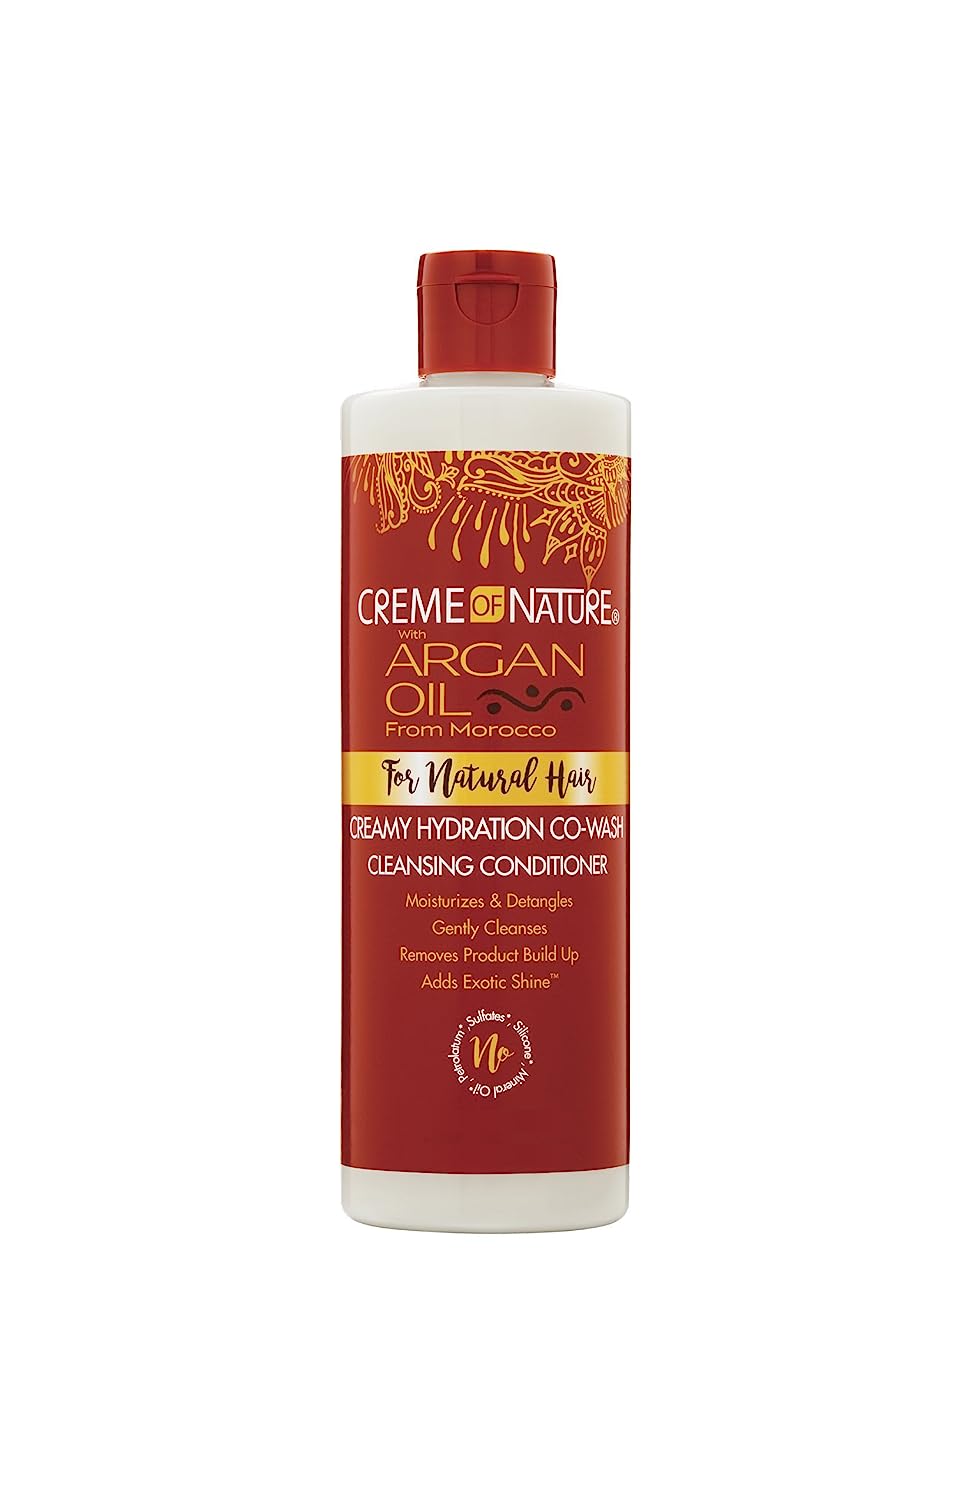 Argan Oil Hair Conditioner by Creme of Nature, Creamy [...]